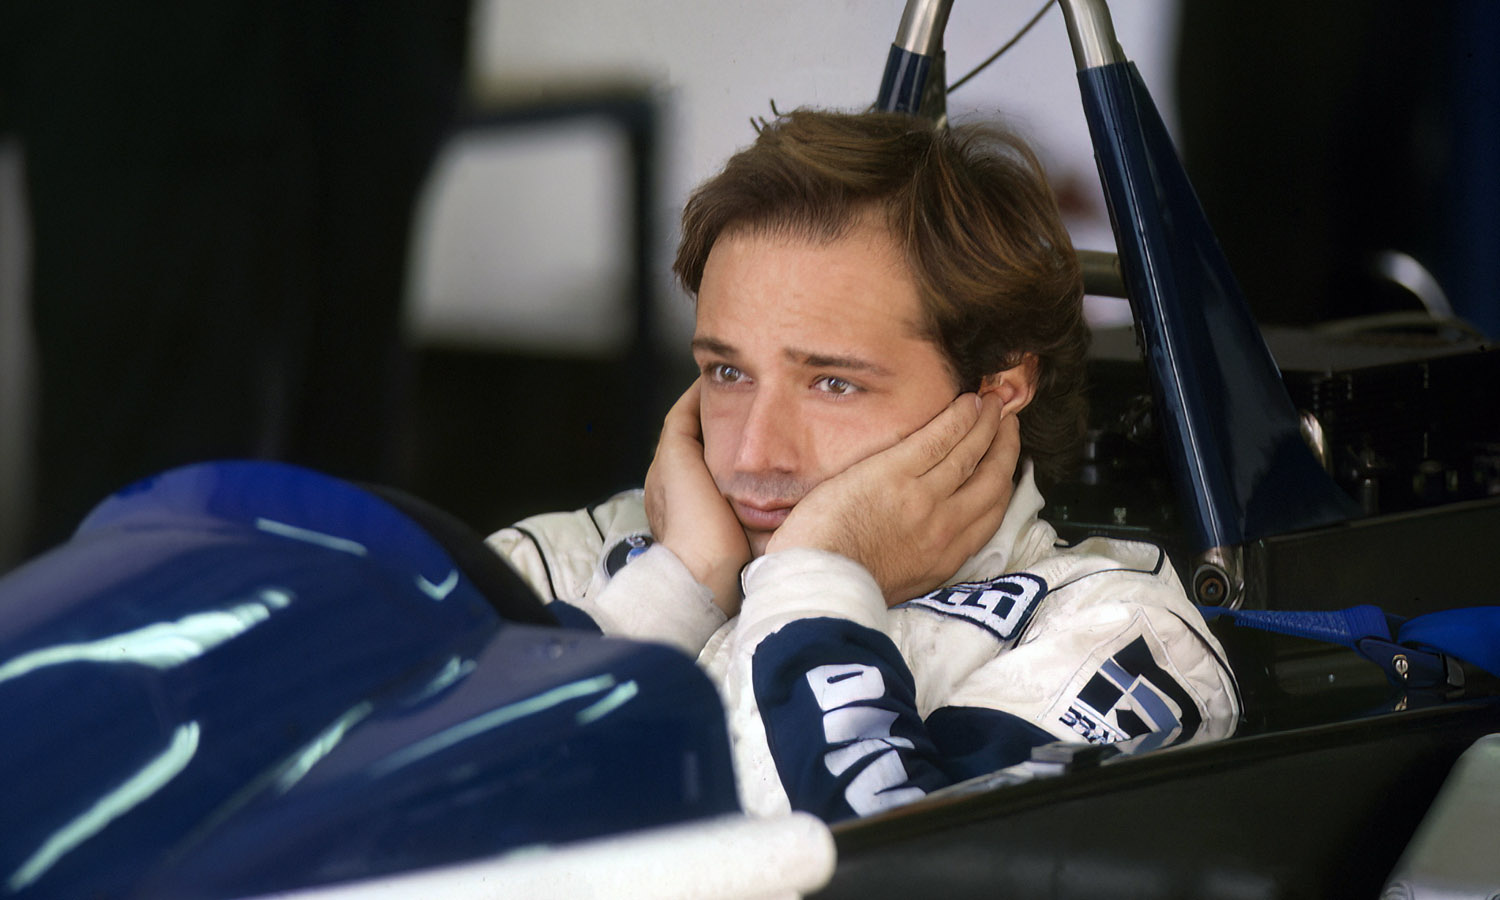 How the tragedy of Elio de Angelis changed F1